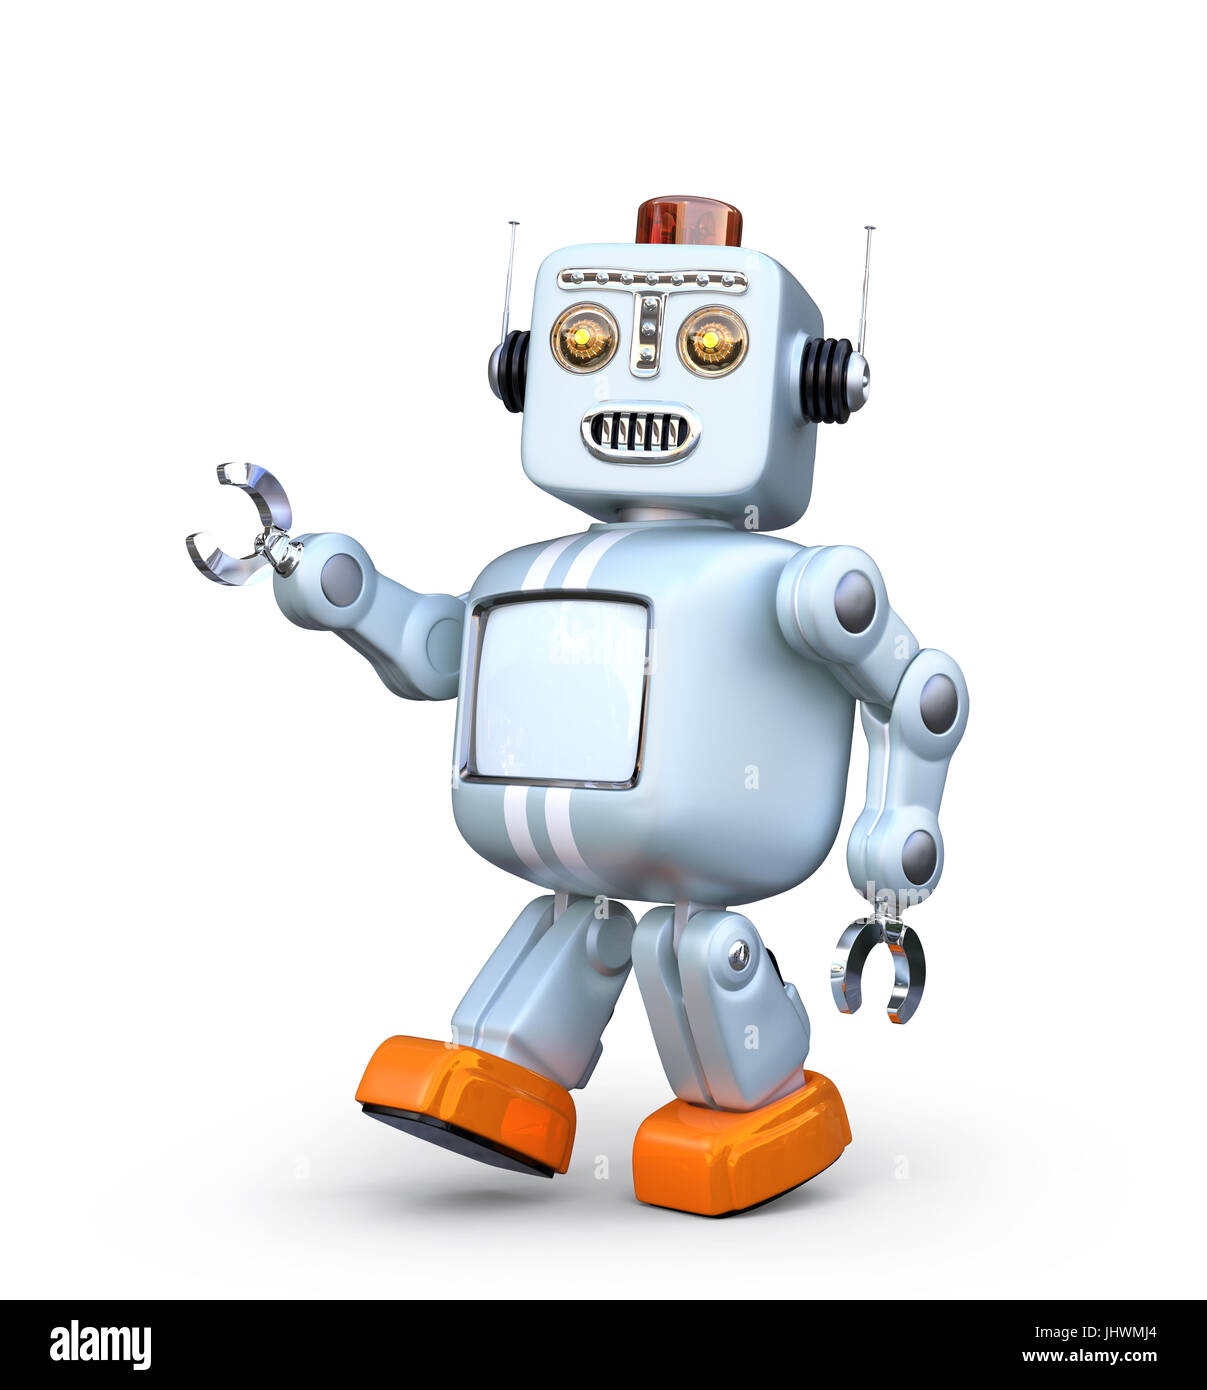 Walking retro robot isolated on white background. 3D rendering image with clipping path. Stock Photo